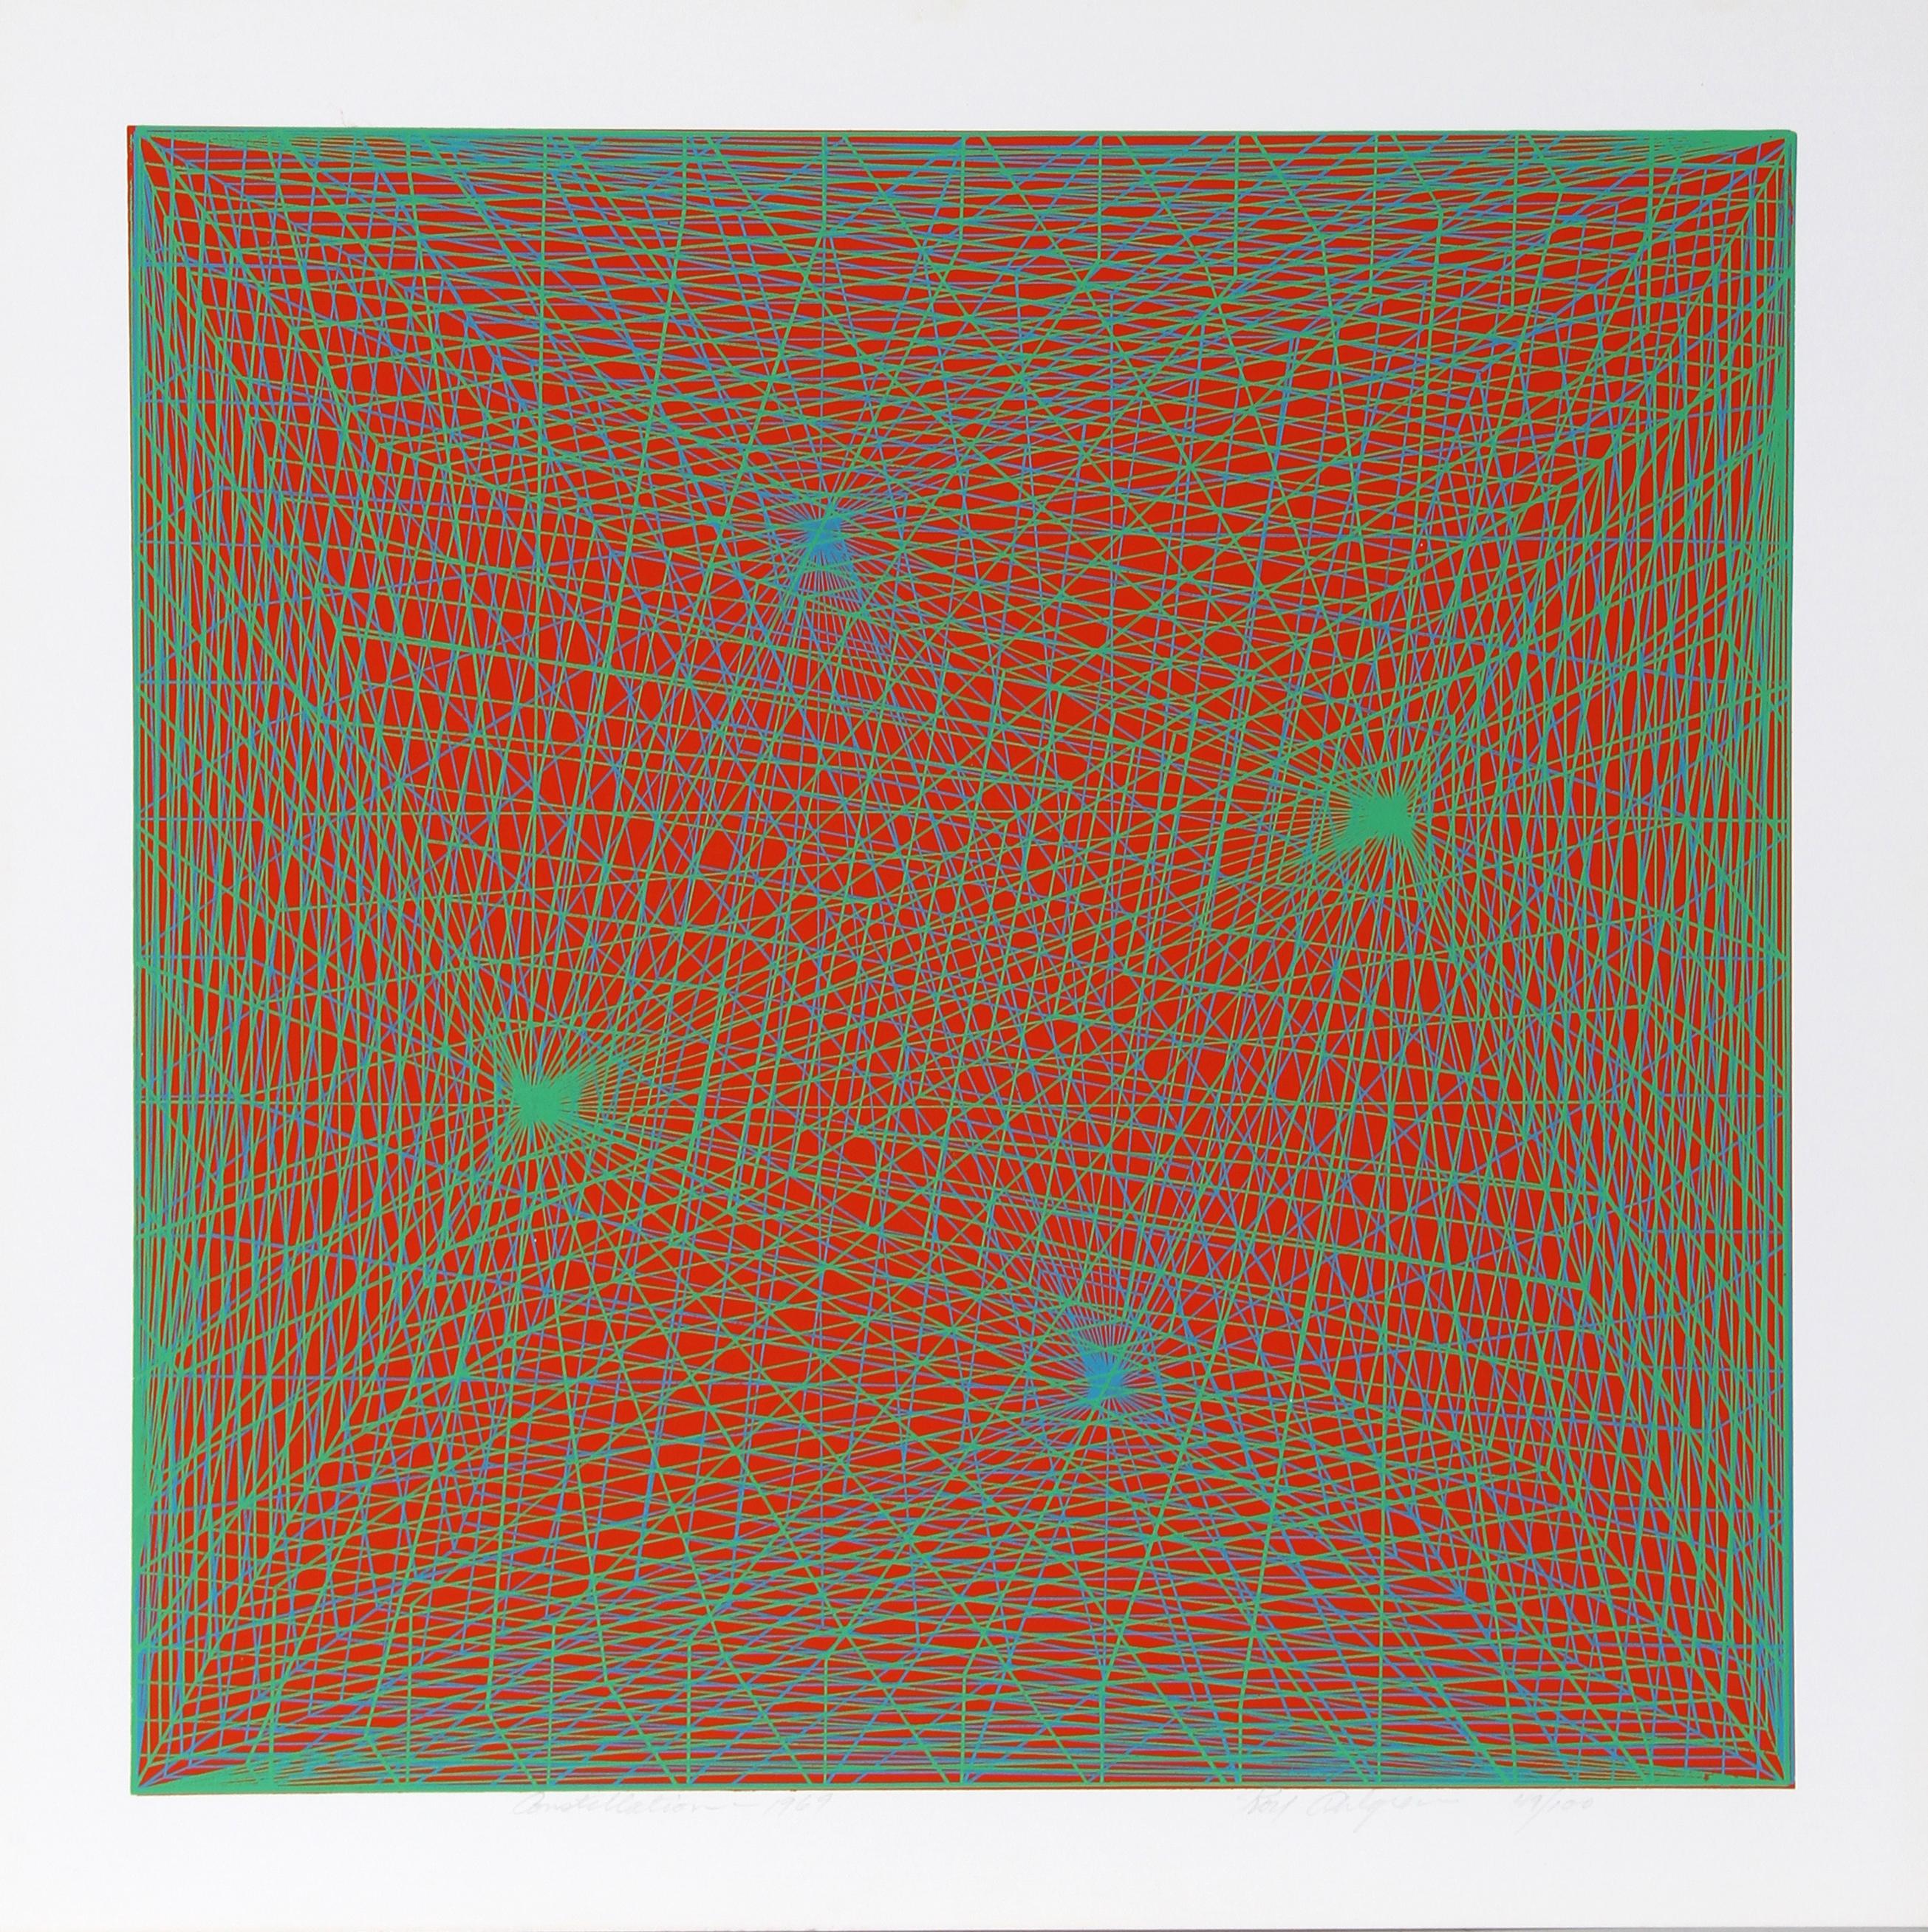 Artist: Roy Ahlgren, American (1927 - 2011)
Title: Constellation
Year: 1969
Medium: Silkscreen, signed, titled and numbered in pencil
Edition: 100
Image Size: 17 x 17 inches
Size: 20 in. x 20 in. (50.8 cm x 50.8 cm)